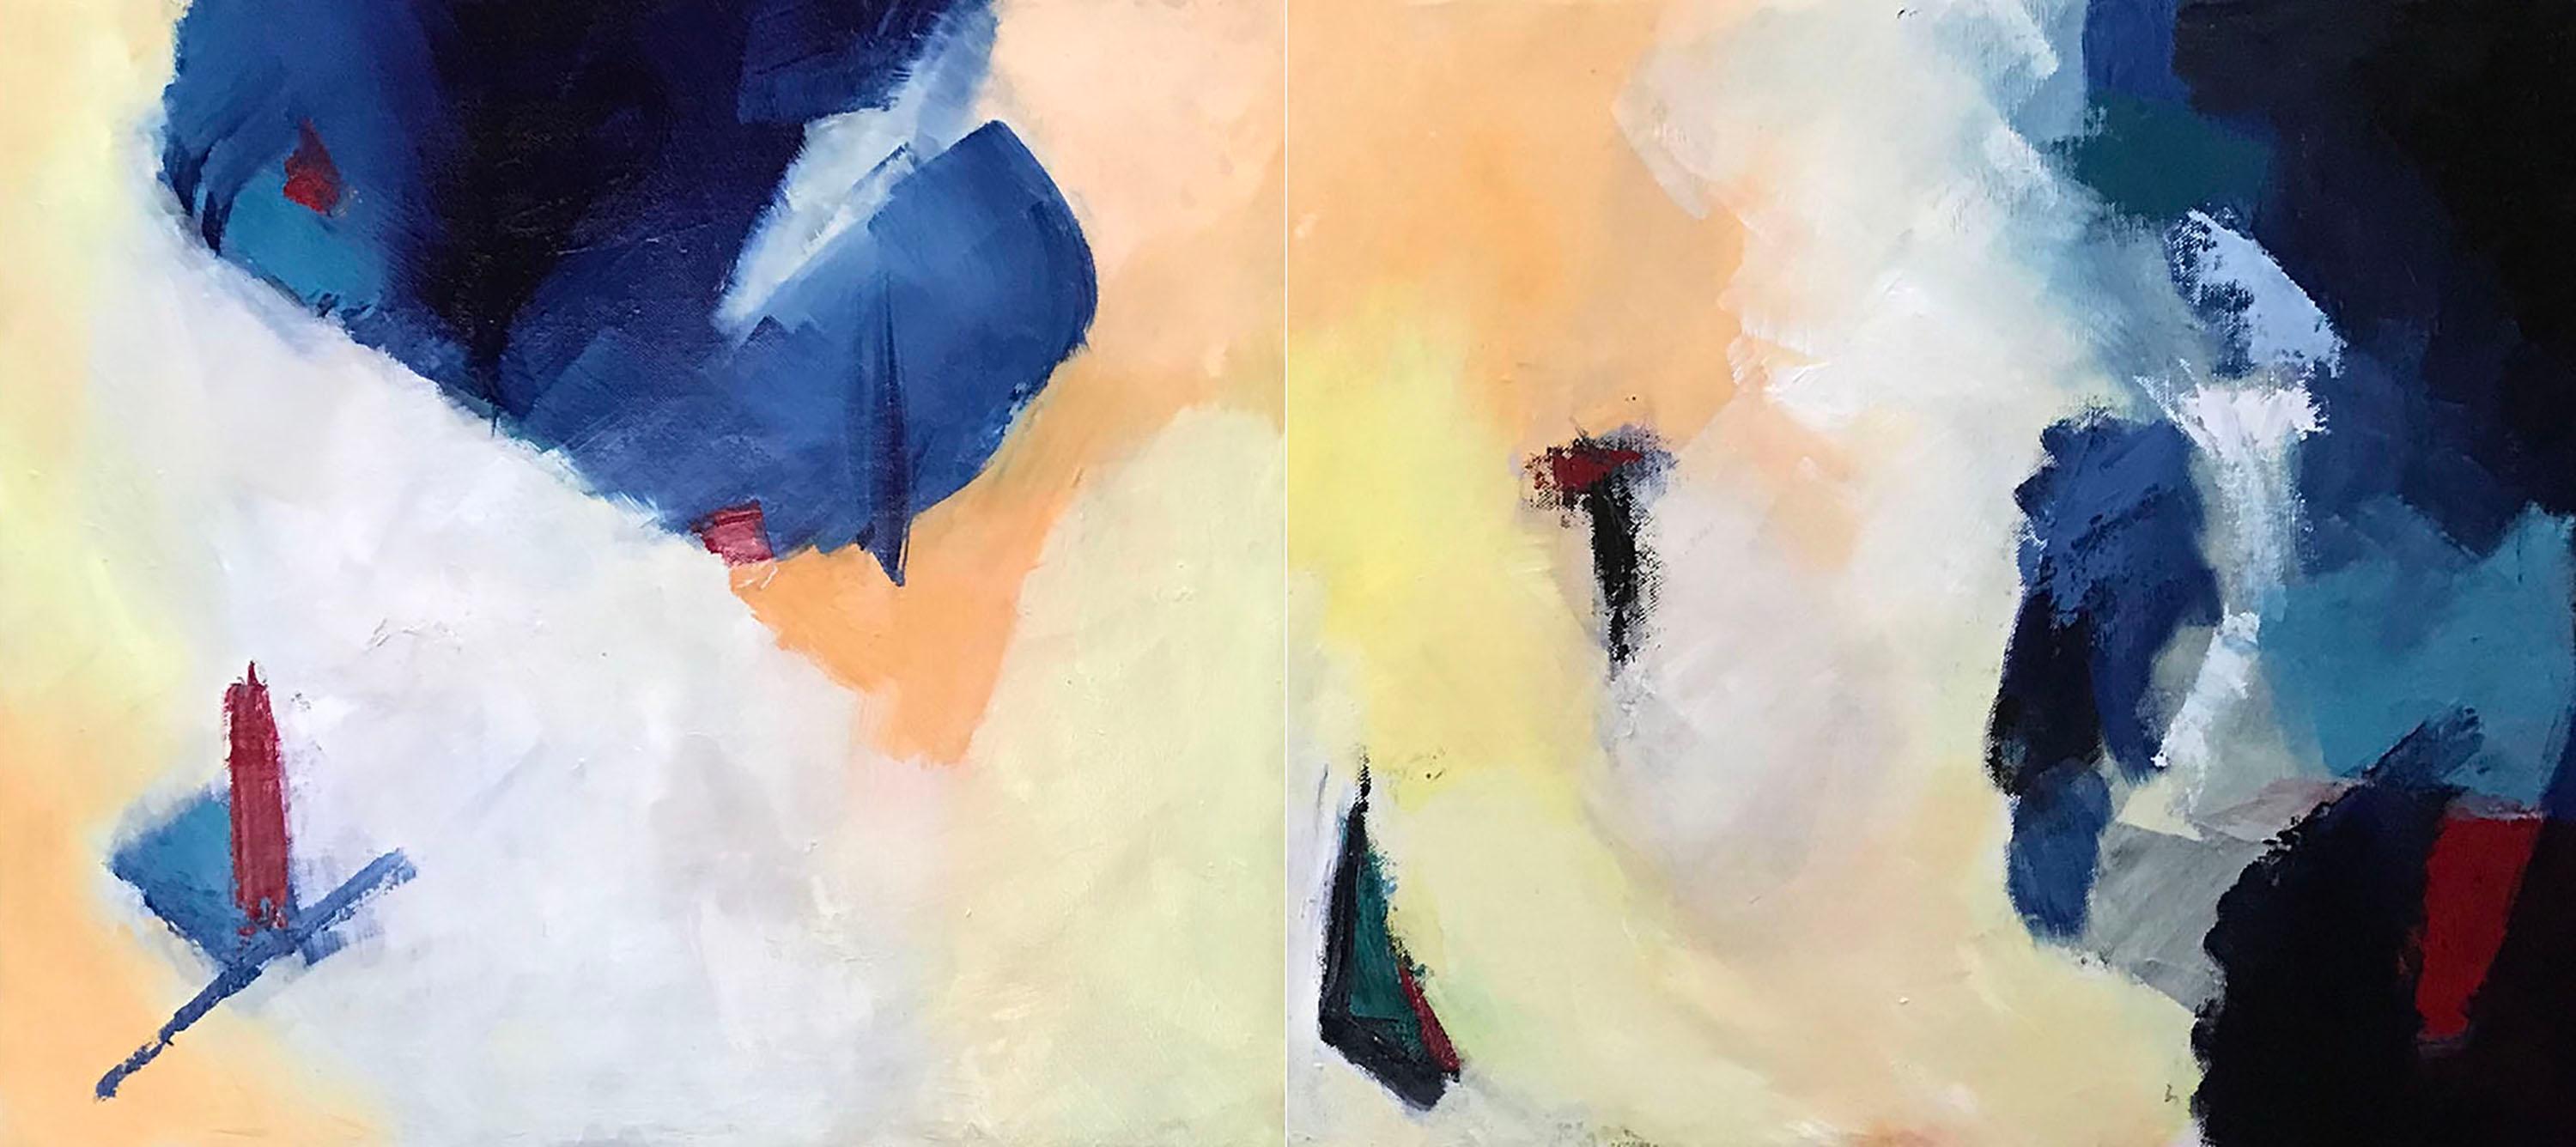 EQUILIBRIO (diptych)
Oil on Canvas
16" x 35"    40.64 x 88.9cm

My work is mainly abstract, I would say abstract expressionism. I love painting with oils, they give me many possibilities I do not find in other mediums. When working with collages on